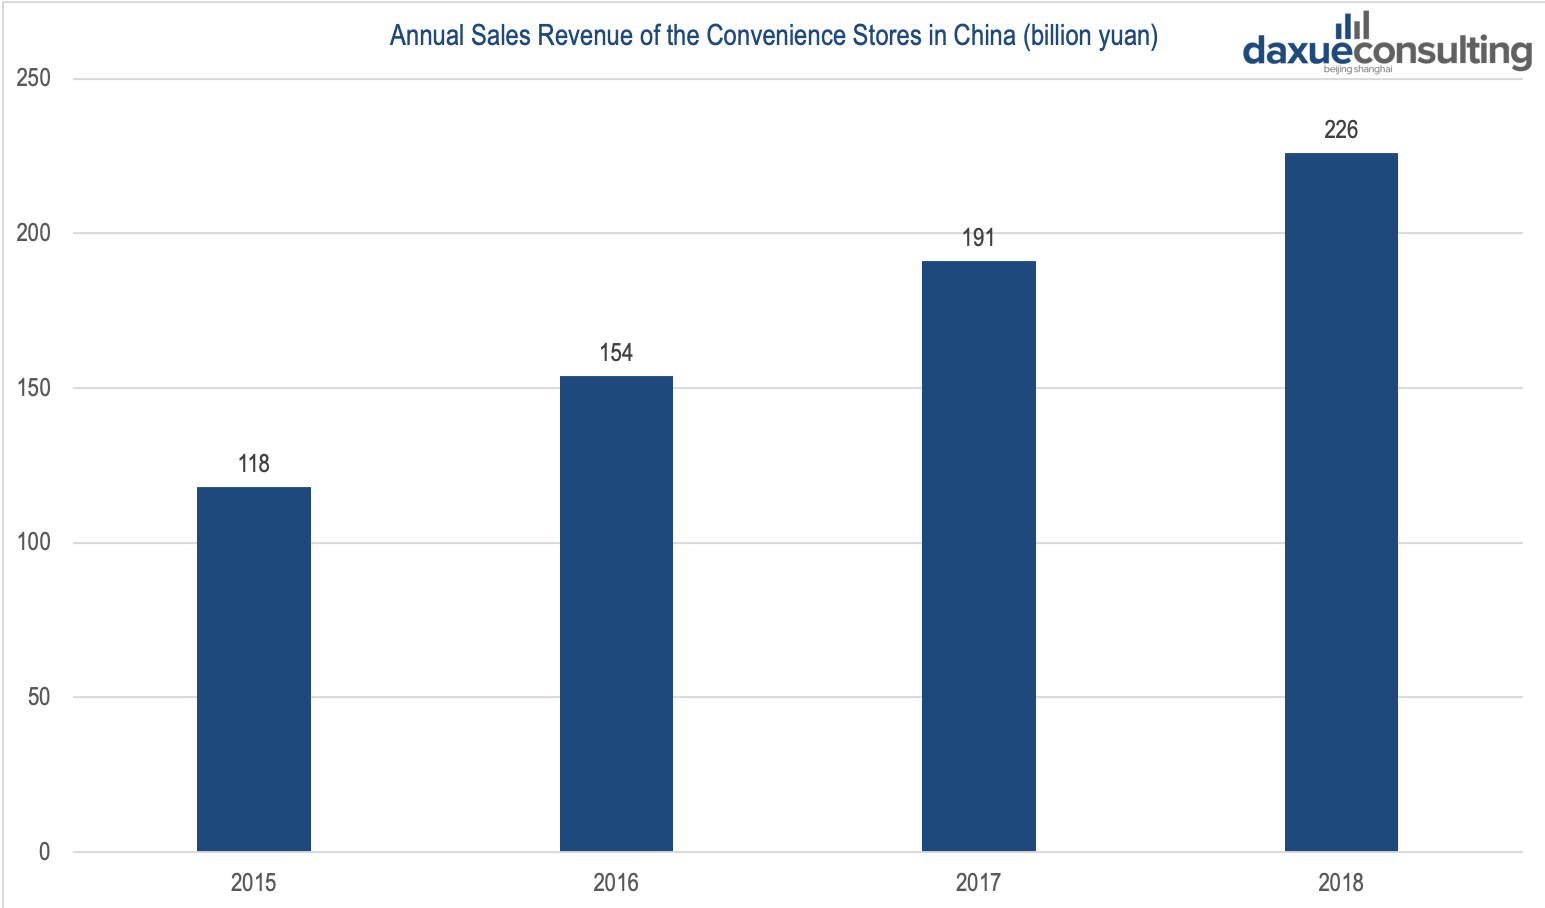 Annual Sales Revenue of the Convenience Store in China